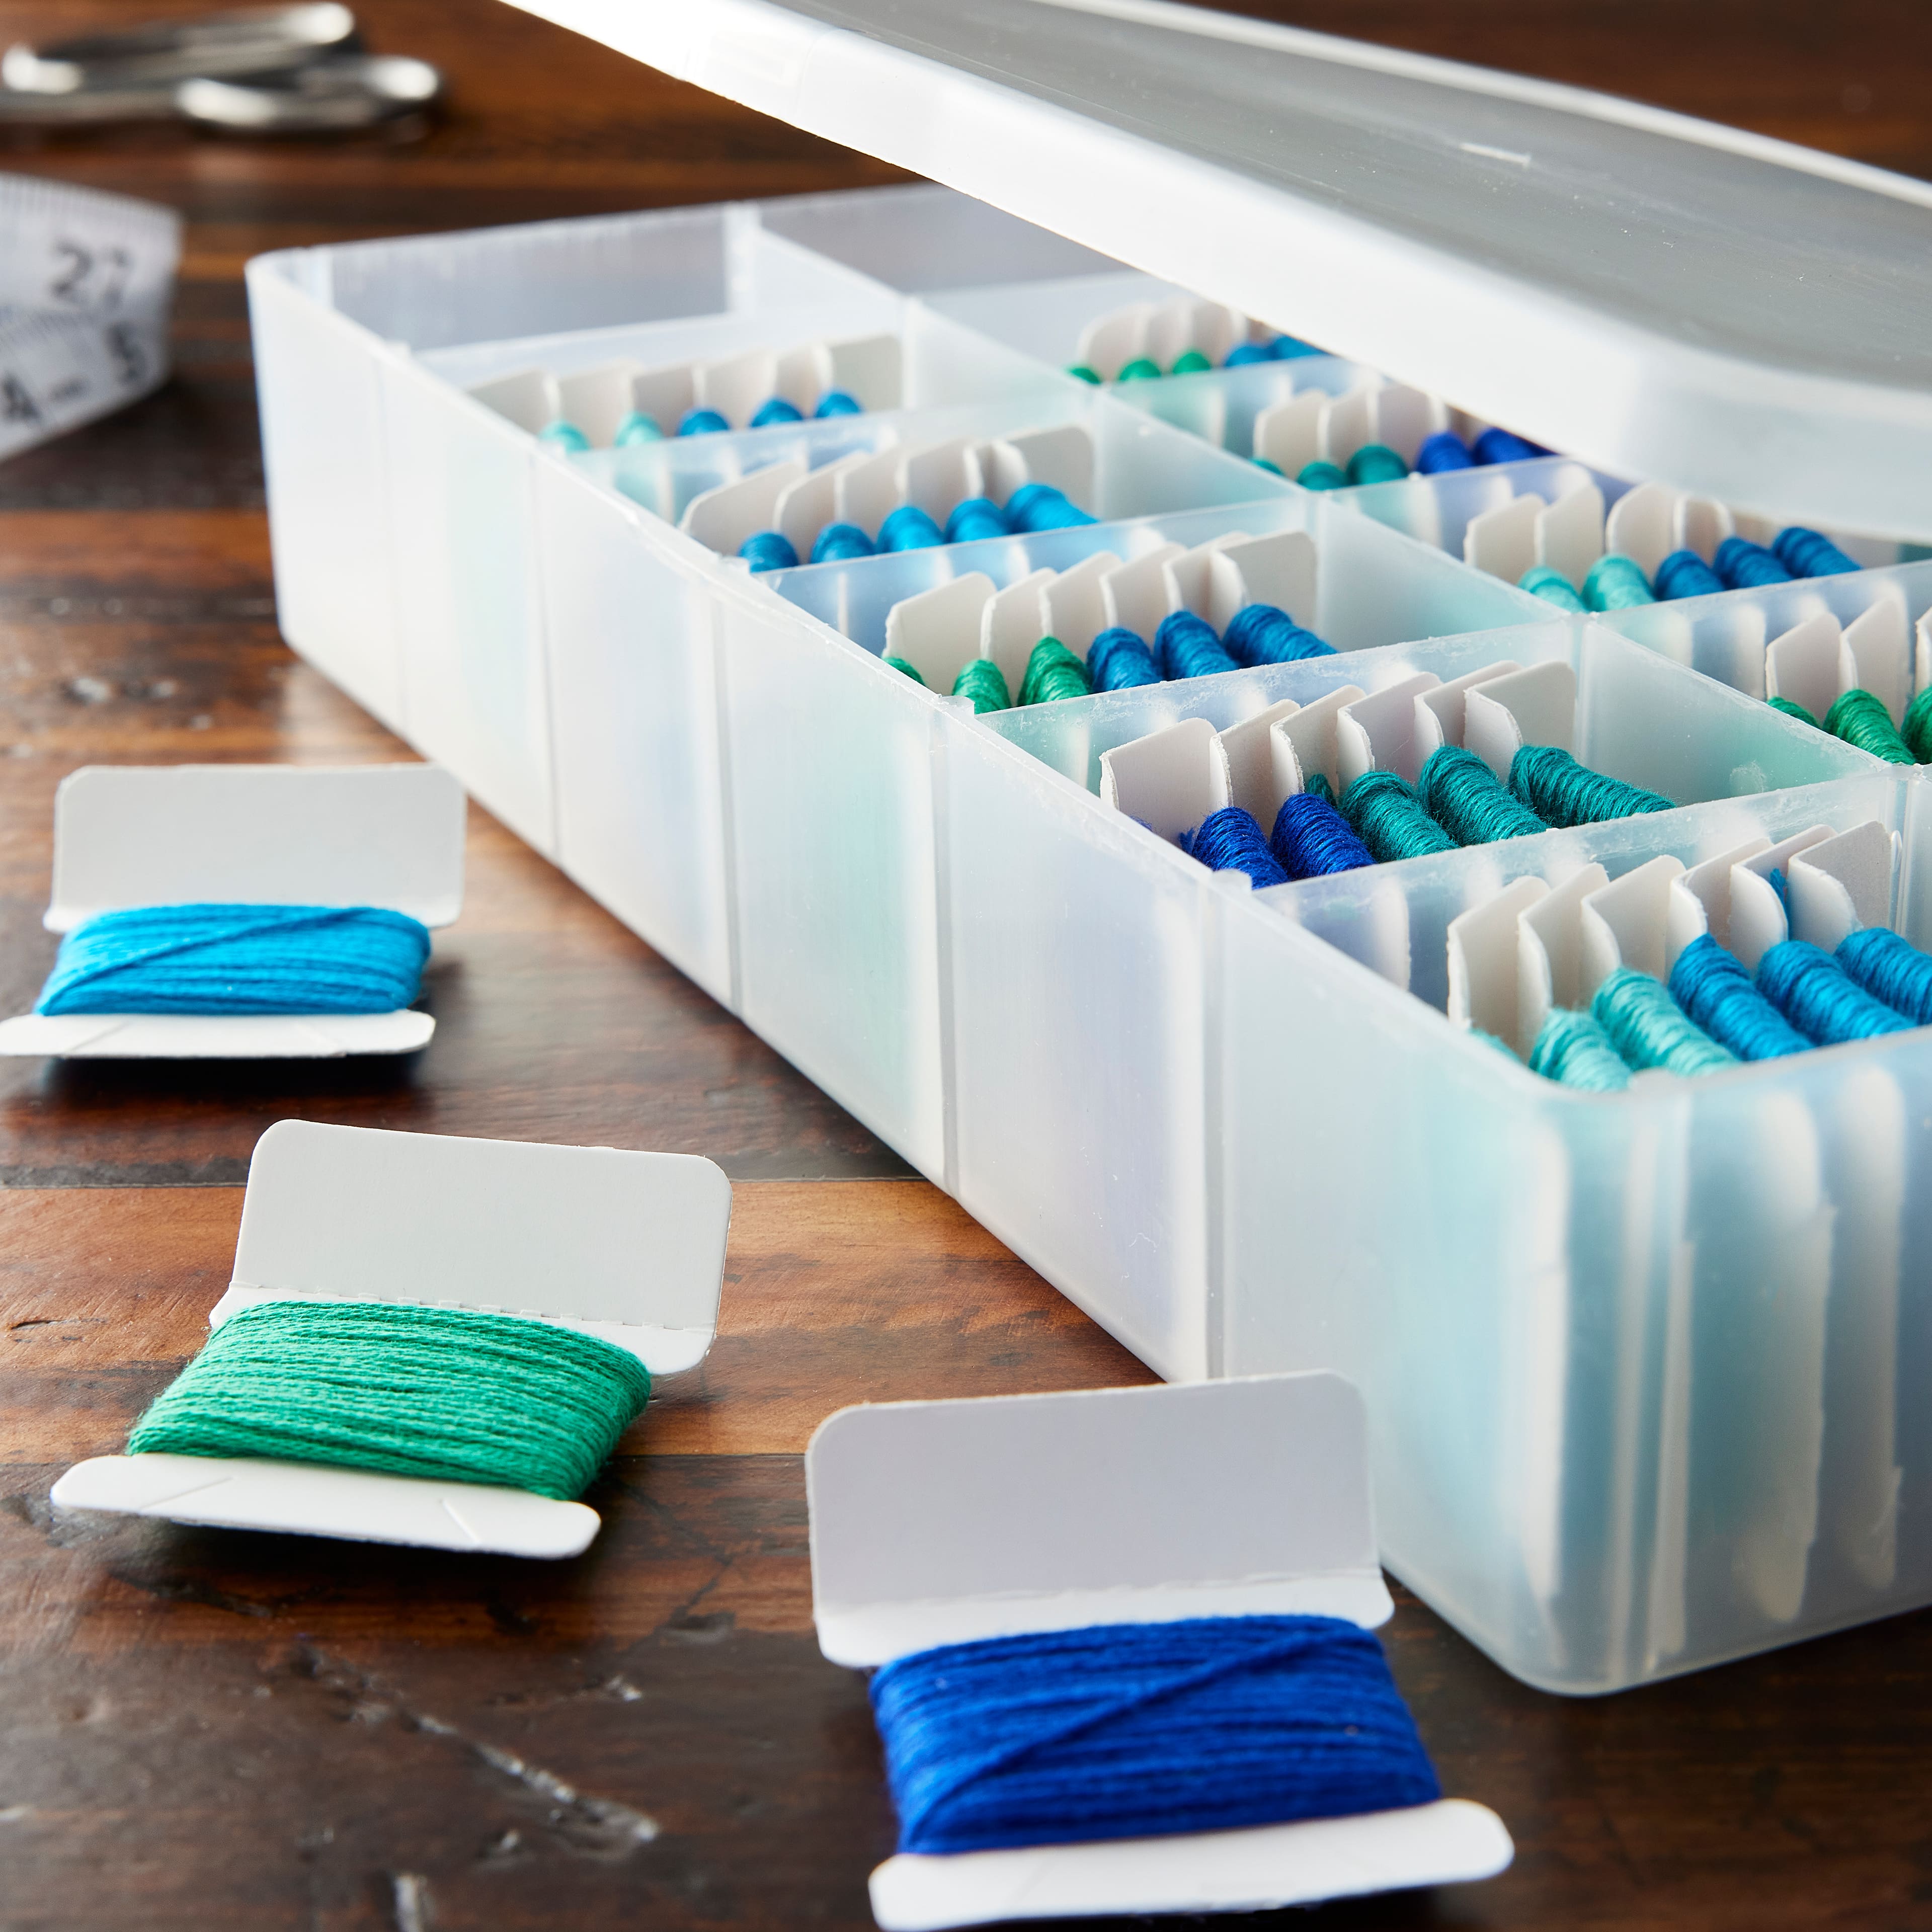 Shop for the Embroidery Floss Organizer Kit by Loops & Threads